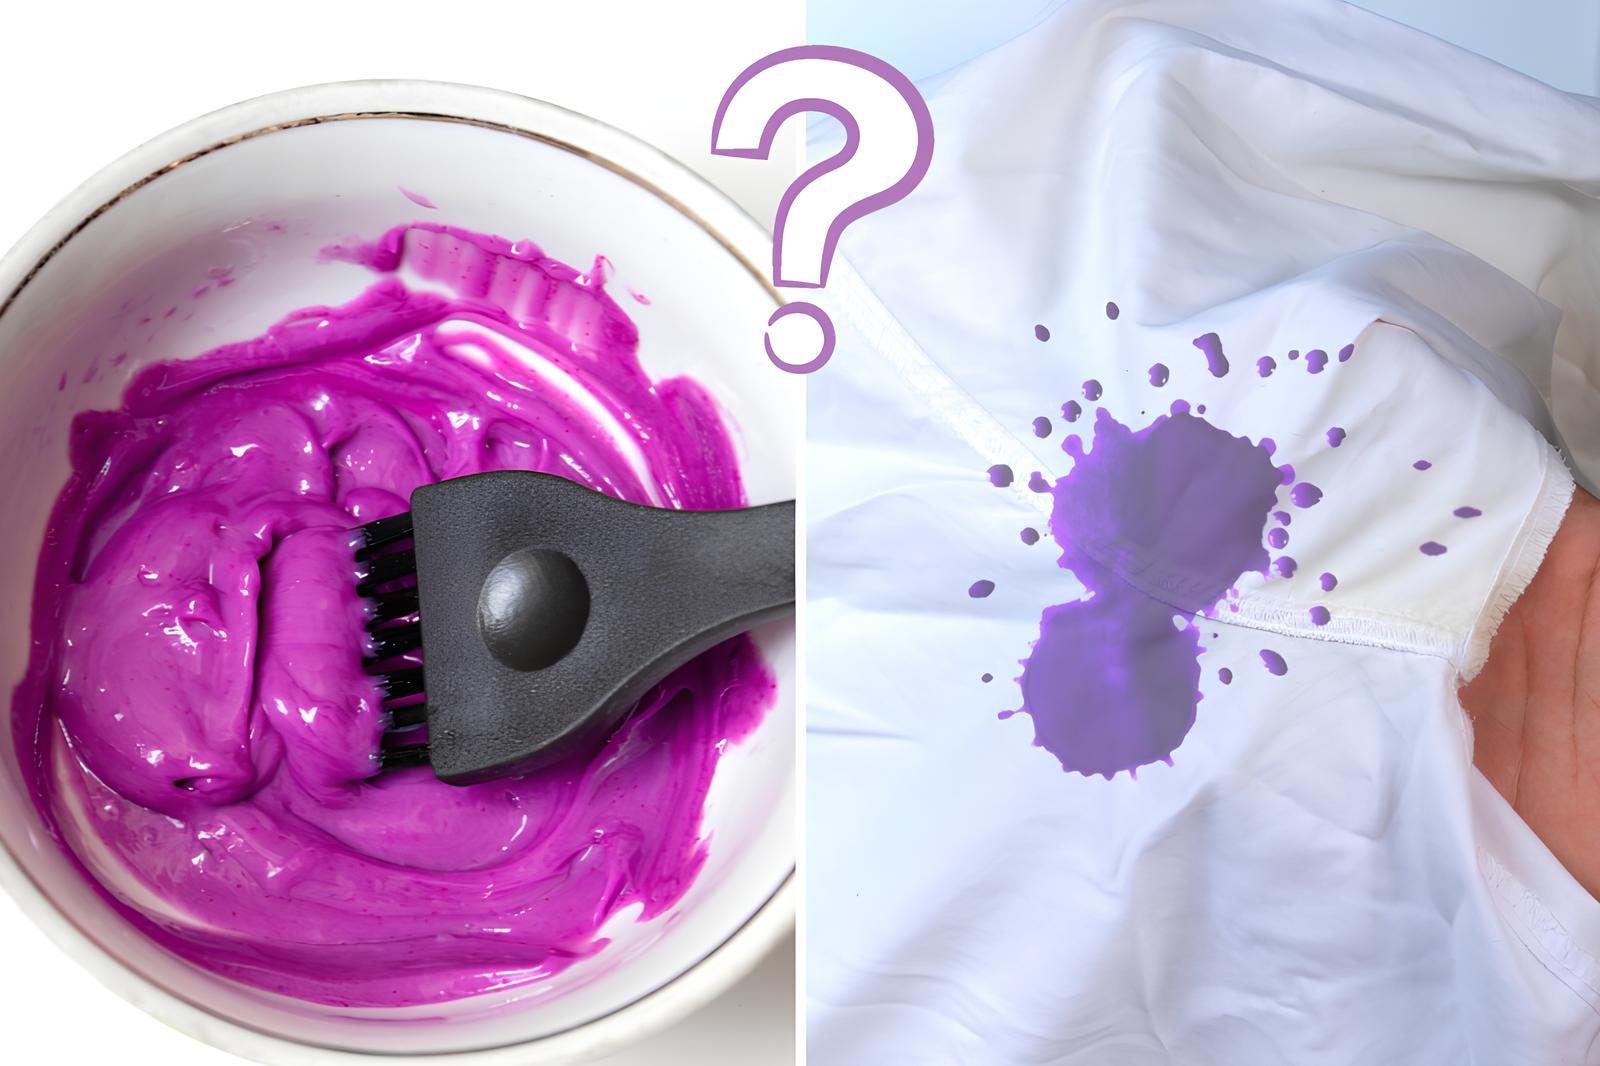 Things to Consider While Removing the Hair Dye from Your Clothes